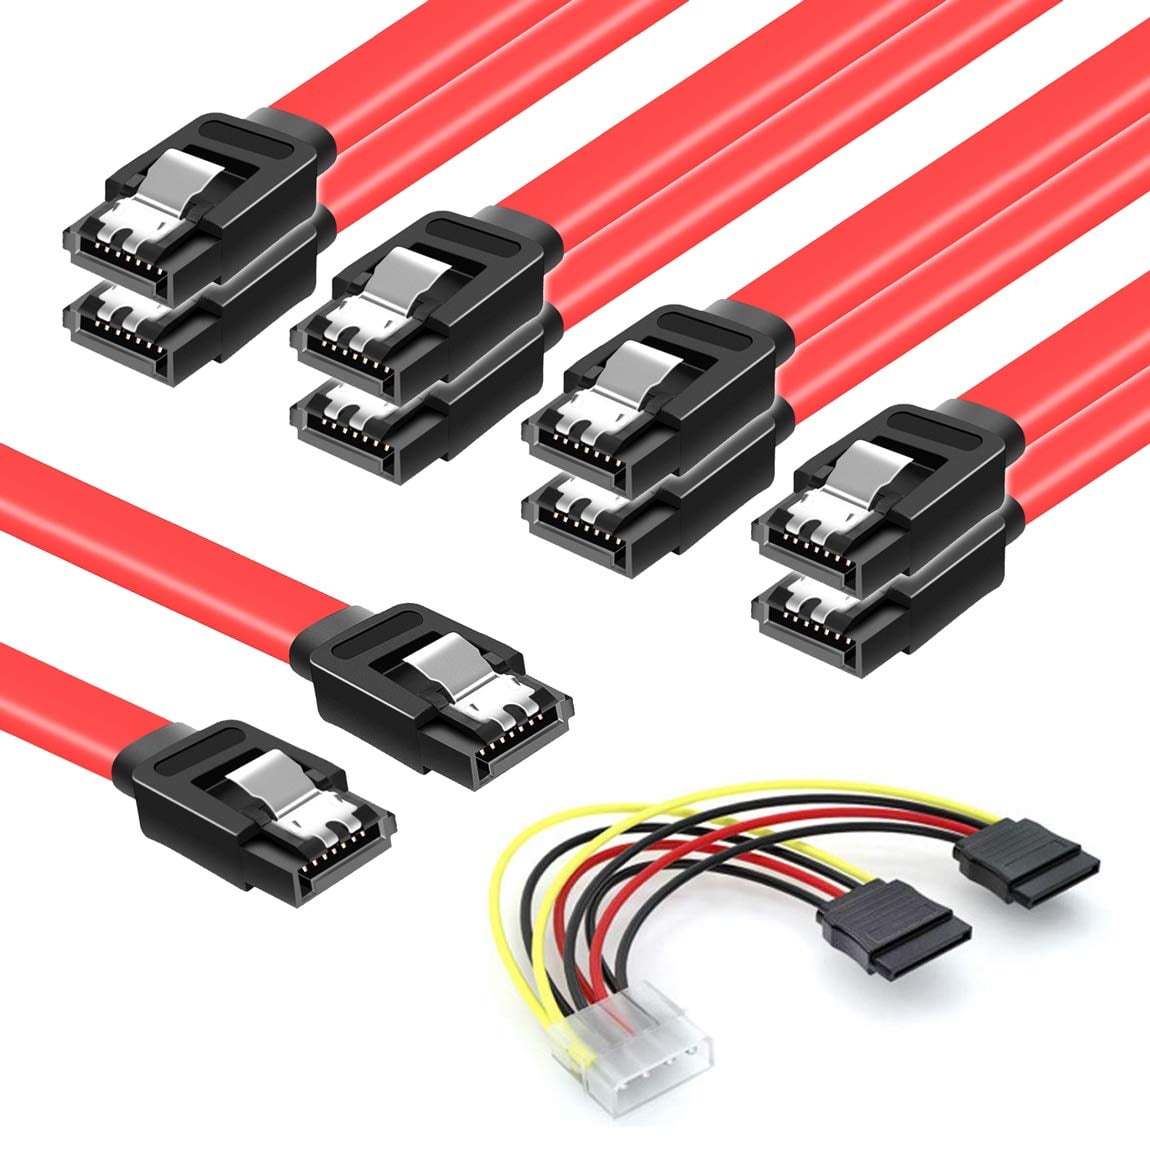 Tag fat Byen Snuble SATA Cables III, SSD Data Cable 6.0 Gbps and Power Splitter 4 Pin to Dual  15 Hard Drive Connection Compatible - Walmart.com